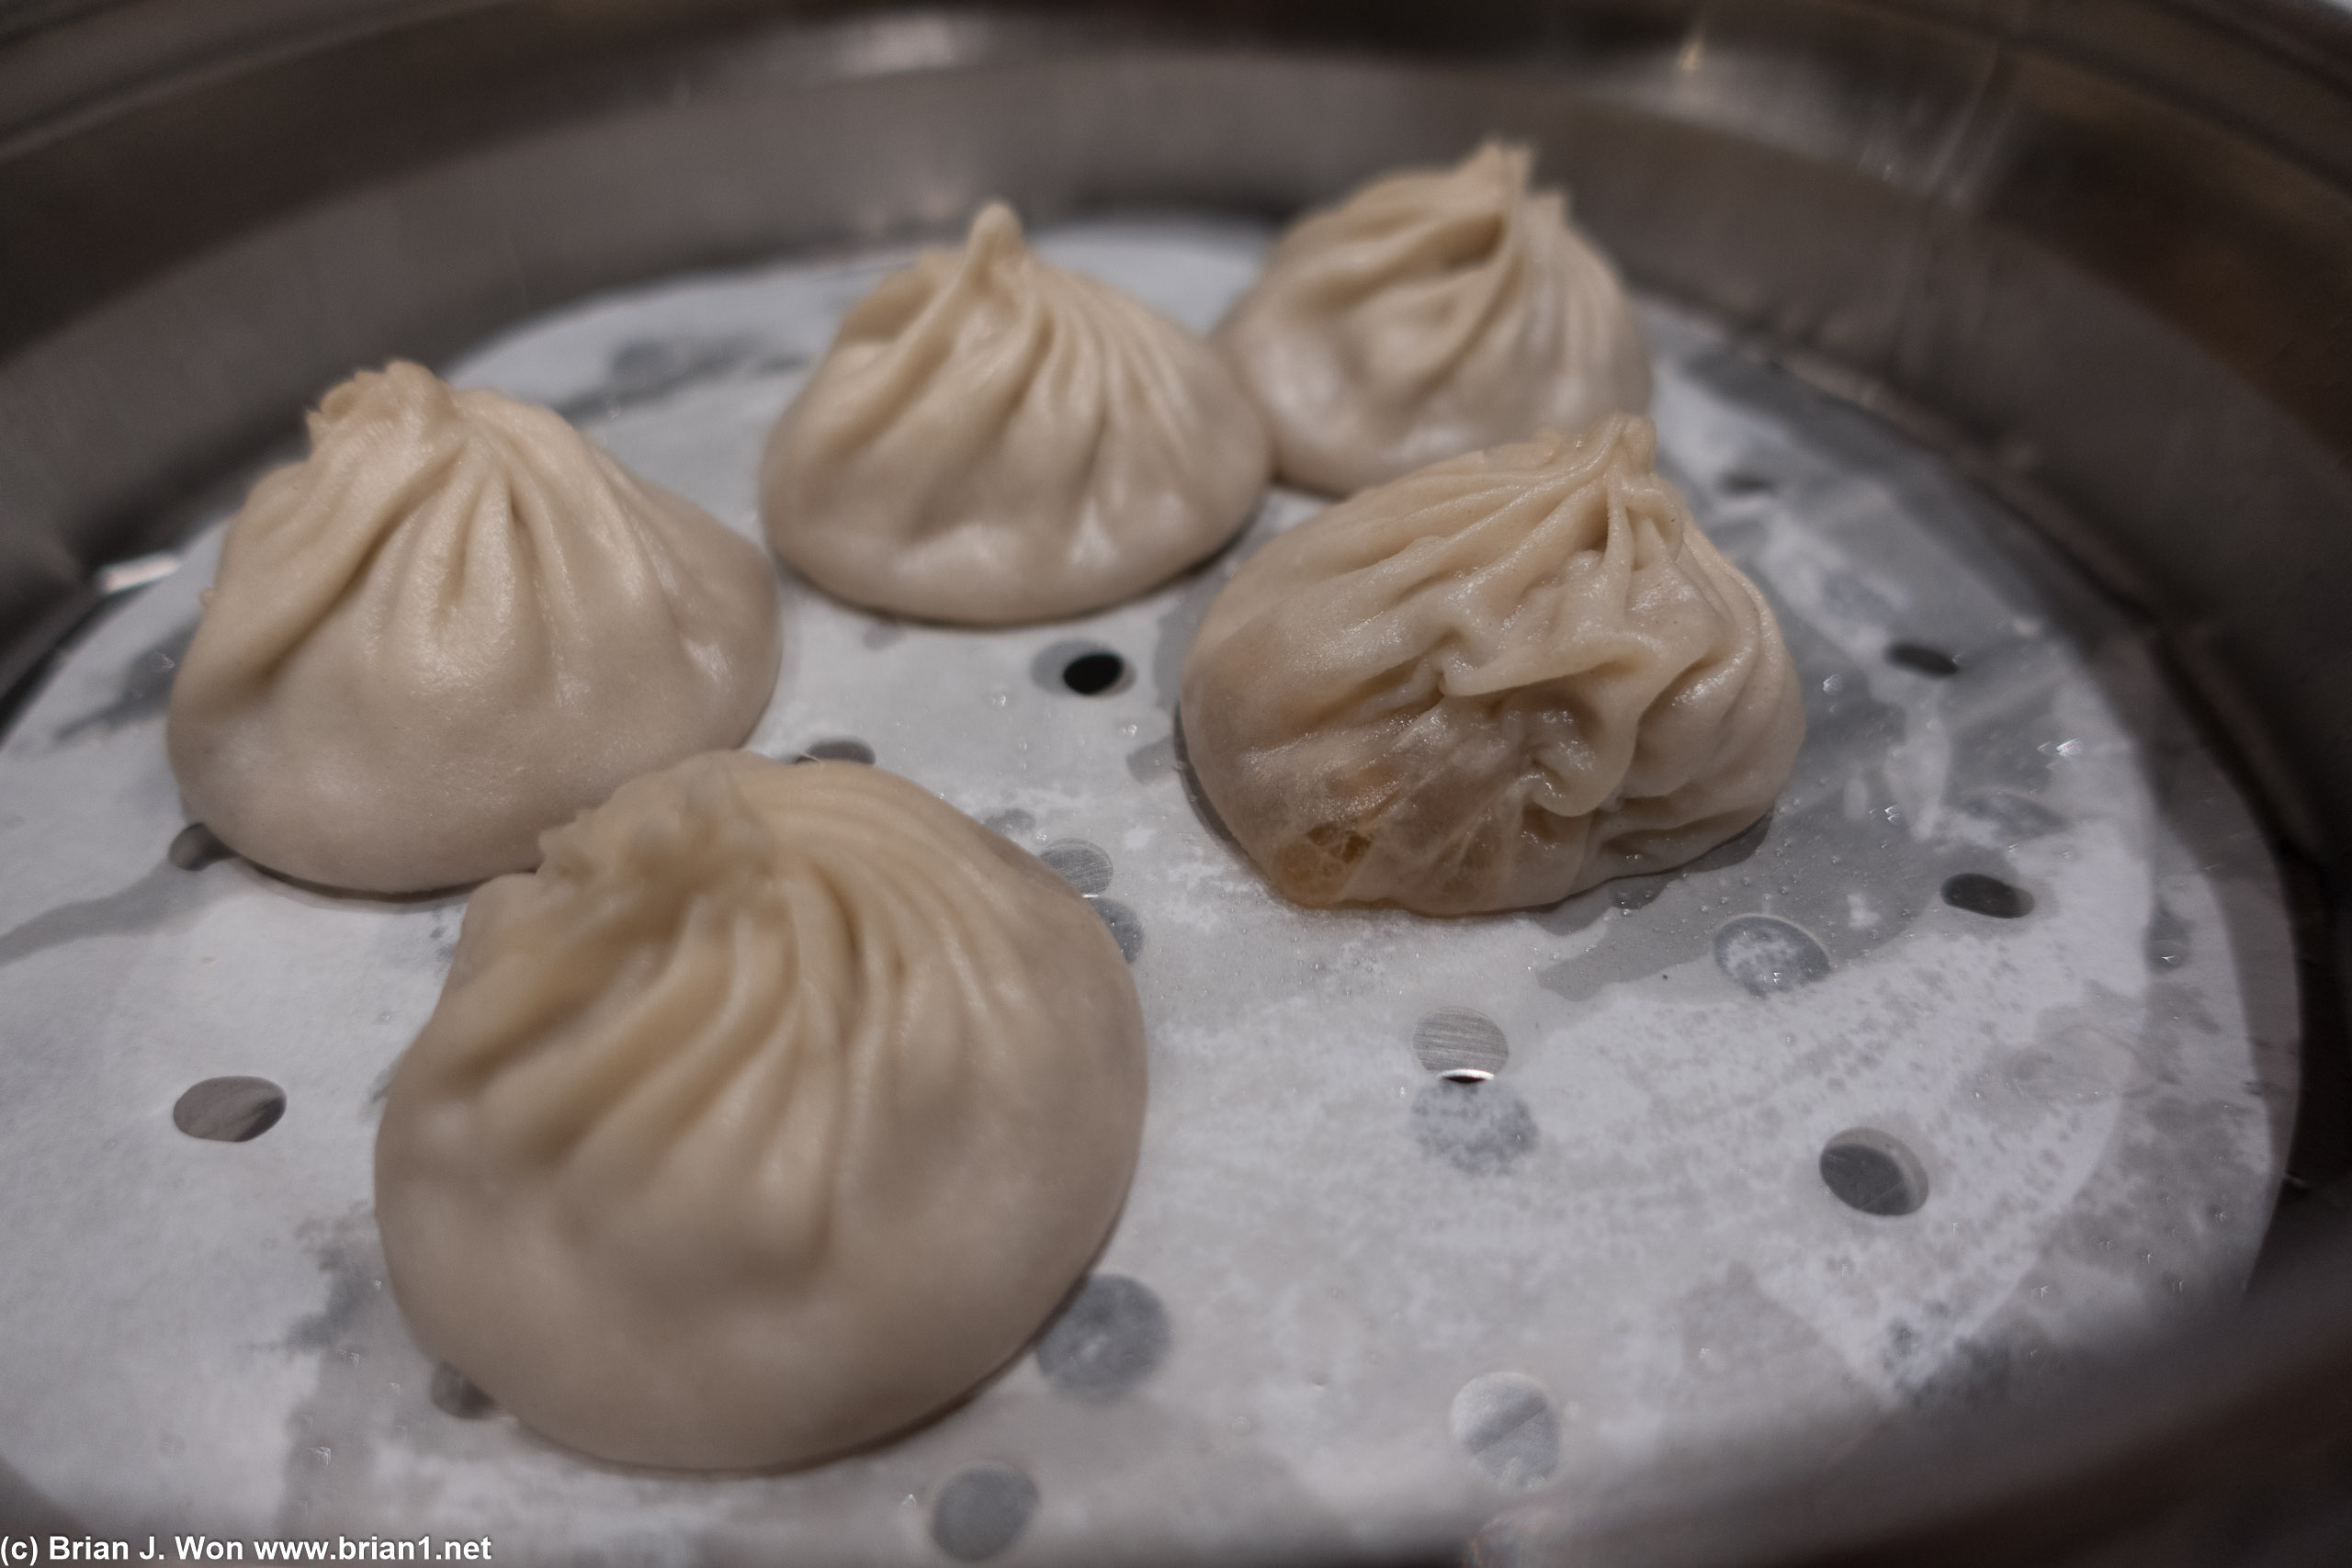 One of the xiao long bao was damaged. Still tasty tho.